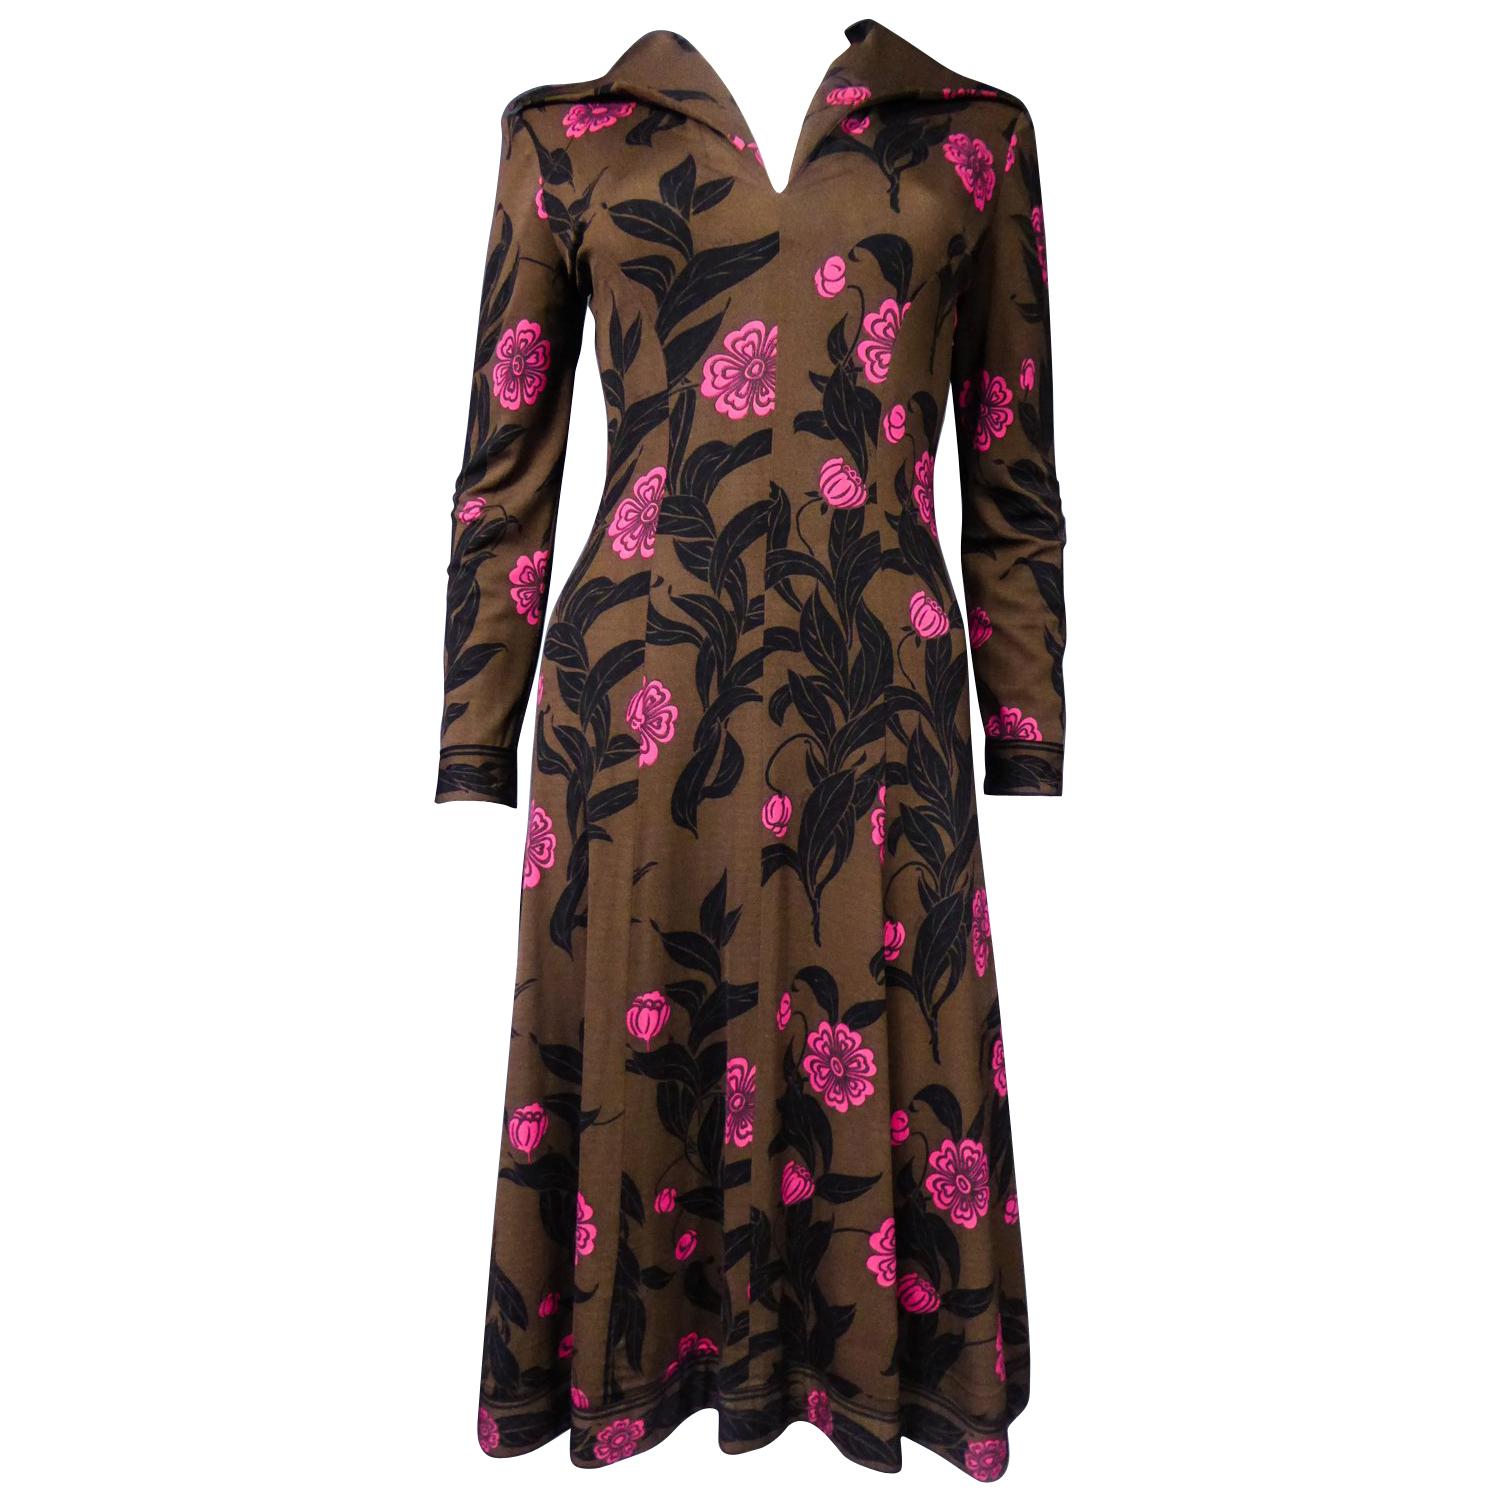 An Emilio Pucci Printed Jersey Dress Circa 1975 For Sale